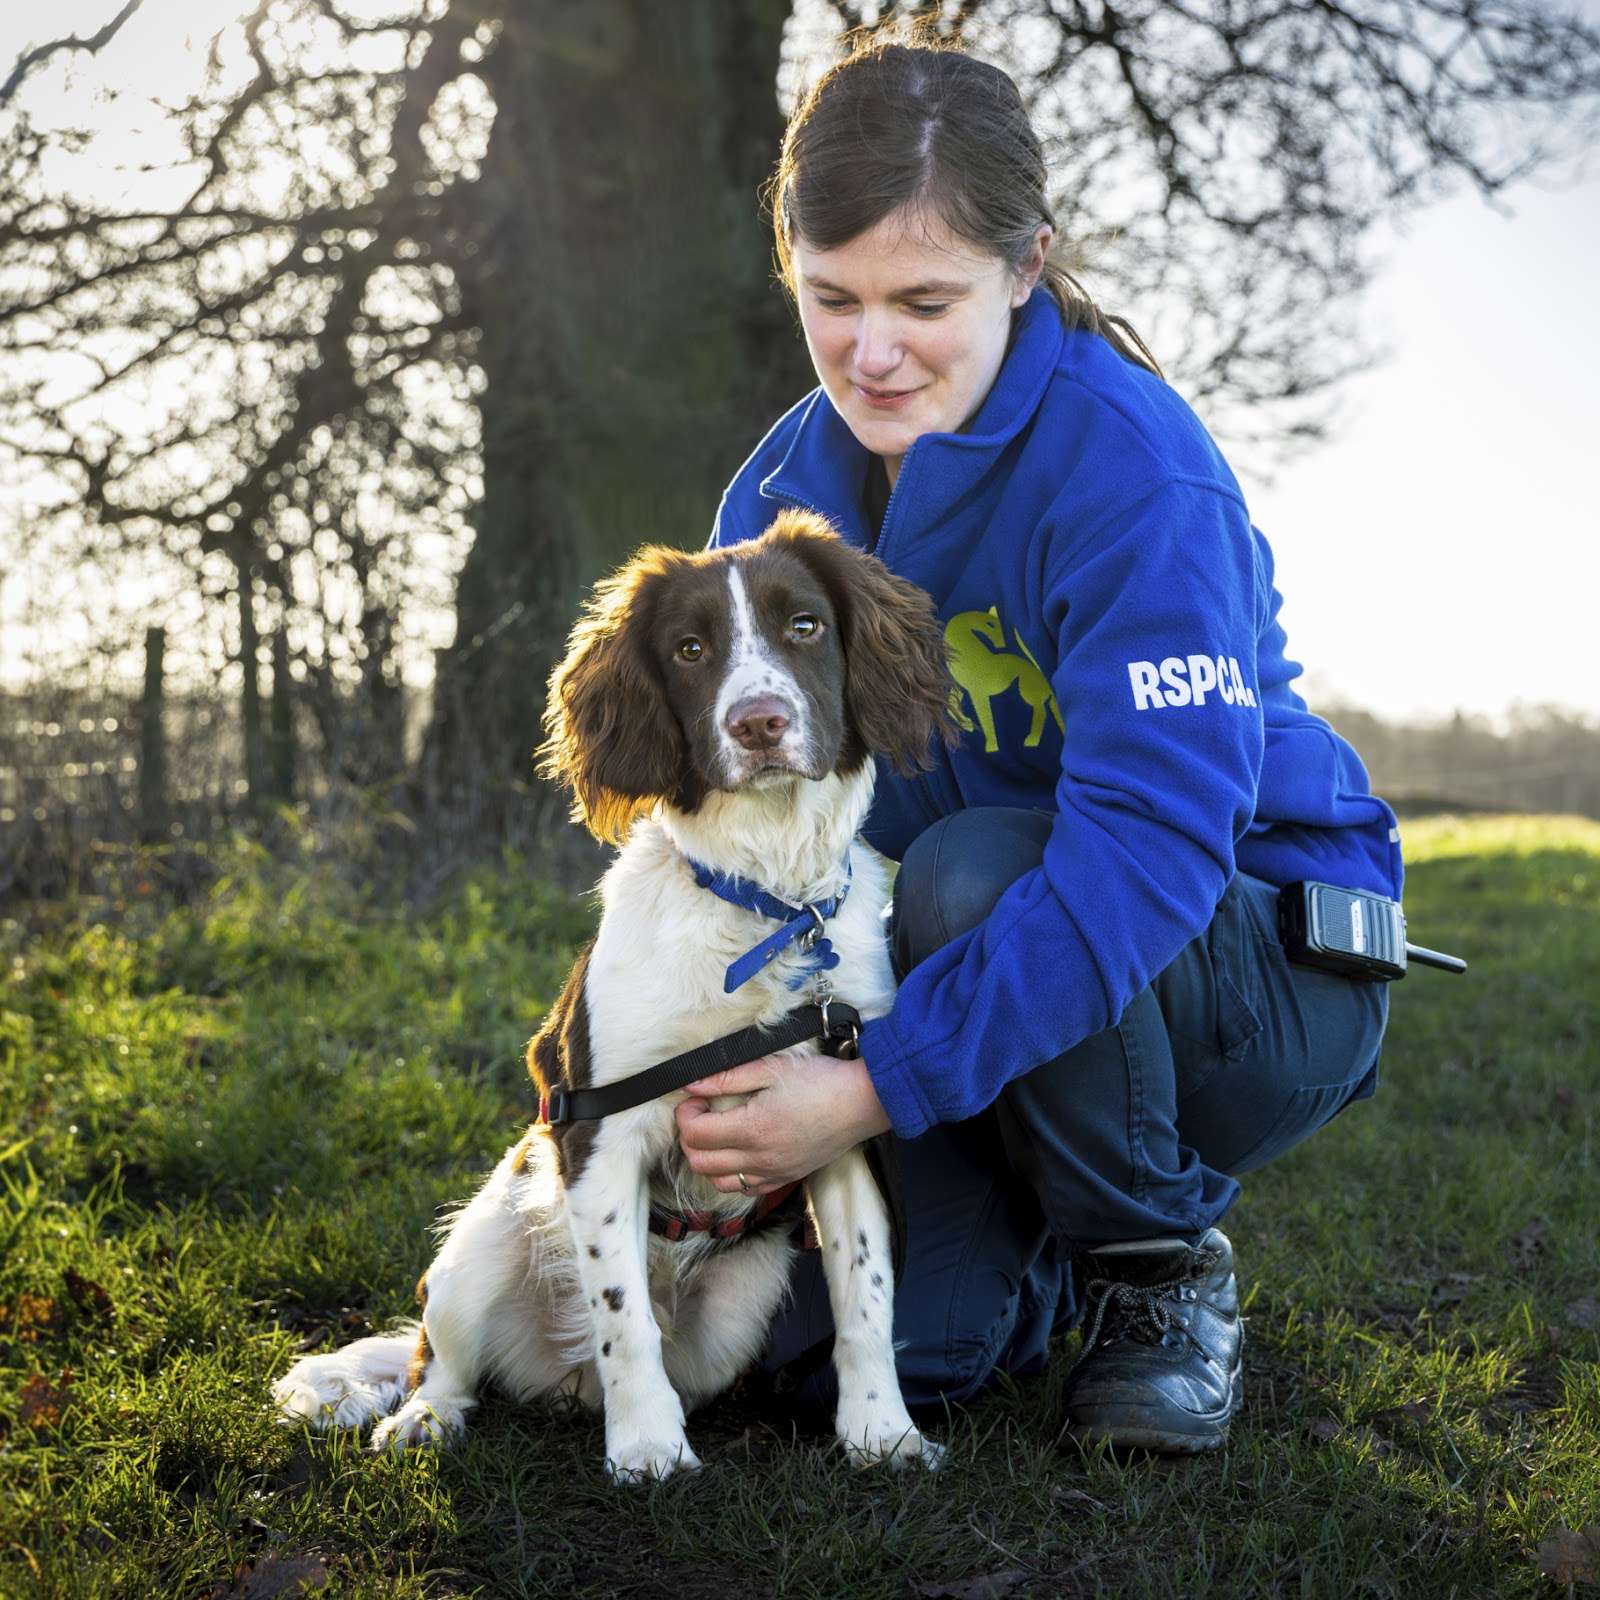 RSPCA launches ‘For Every Kind’ campaign in Wales to ‘rethink animals’ in 200th year